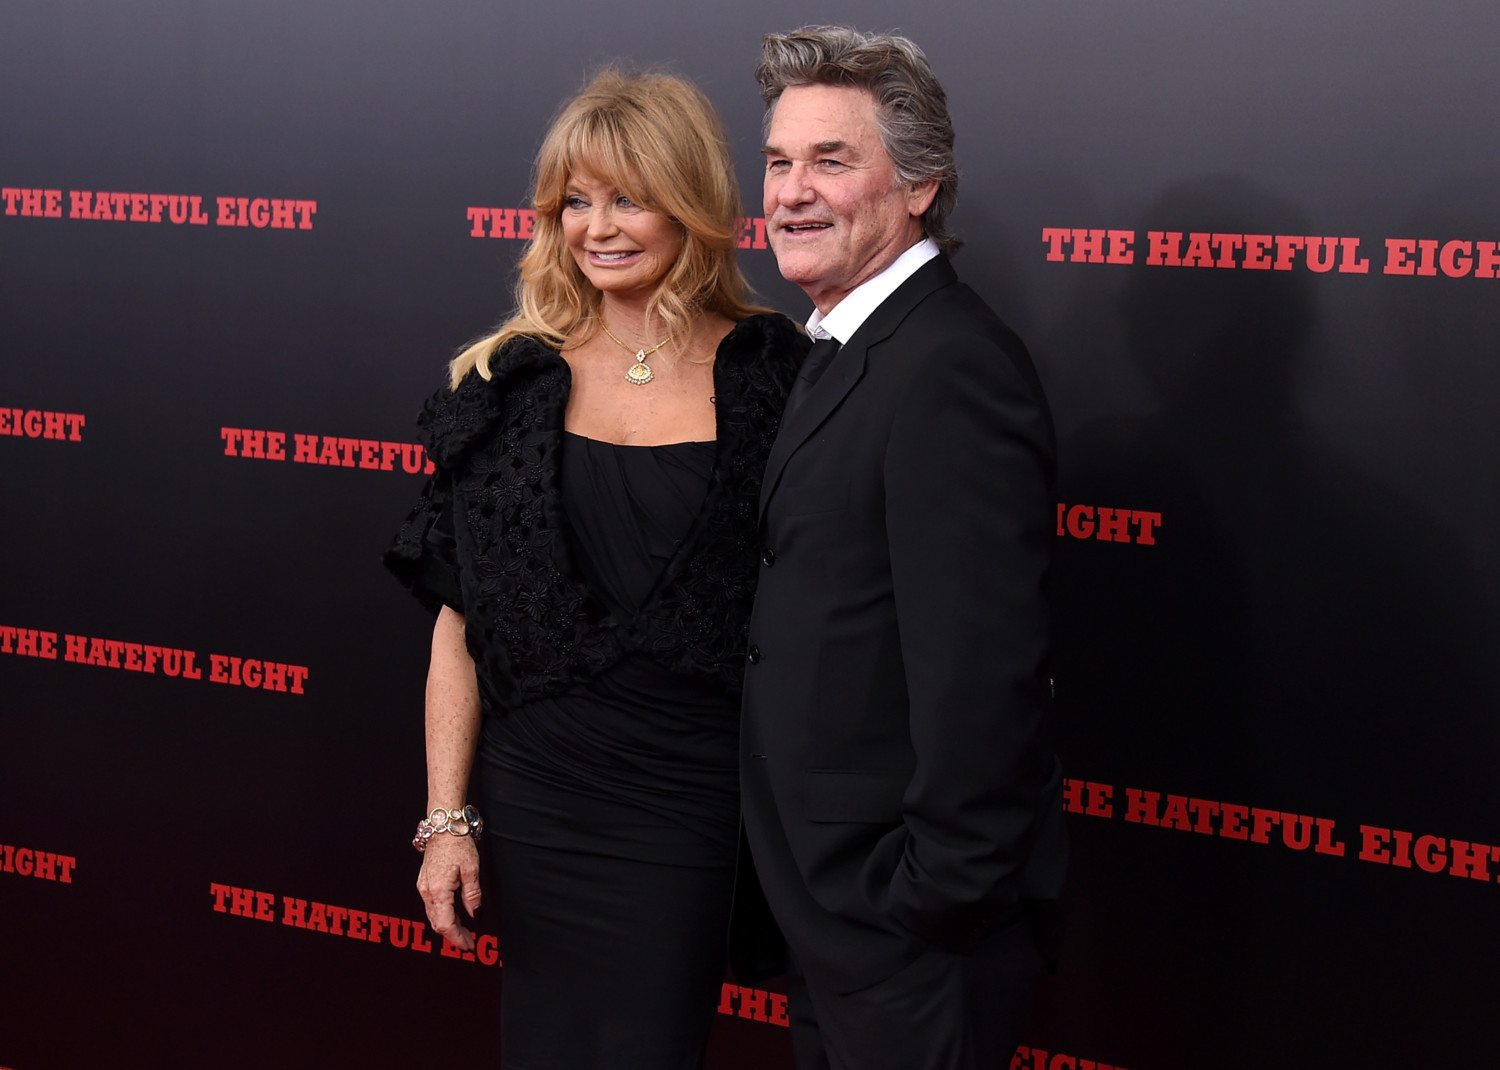 The New York Premiere Of 'The Hateful Eight'